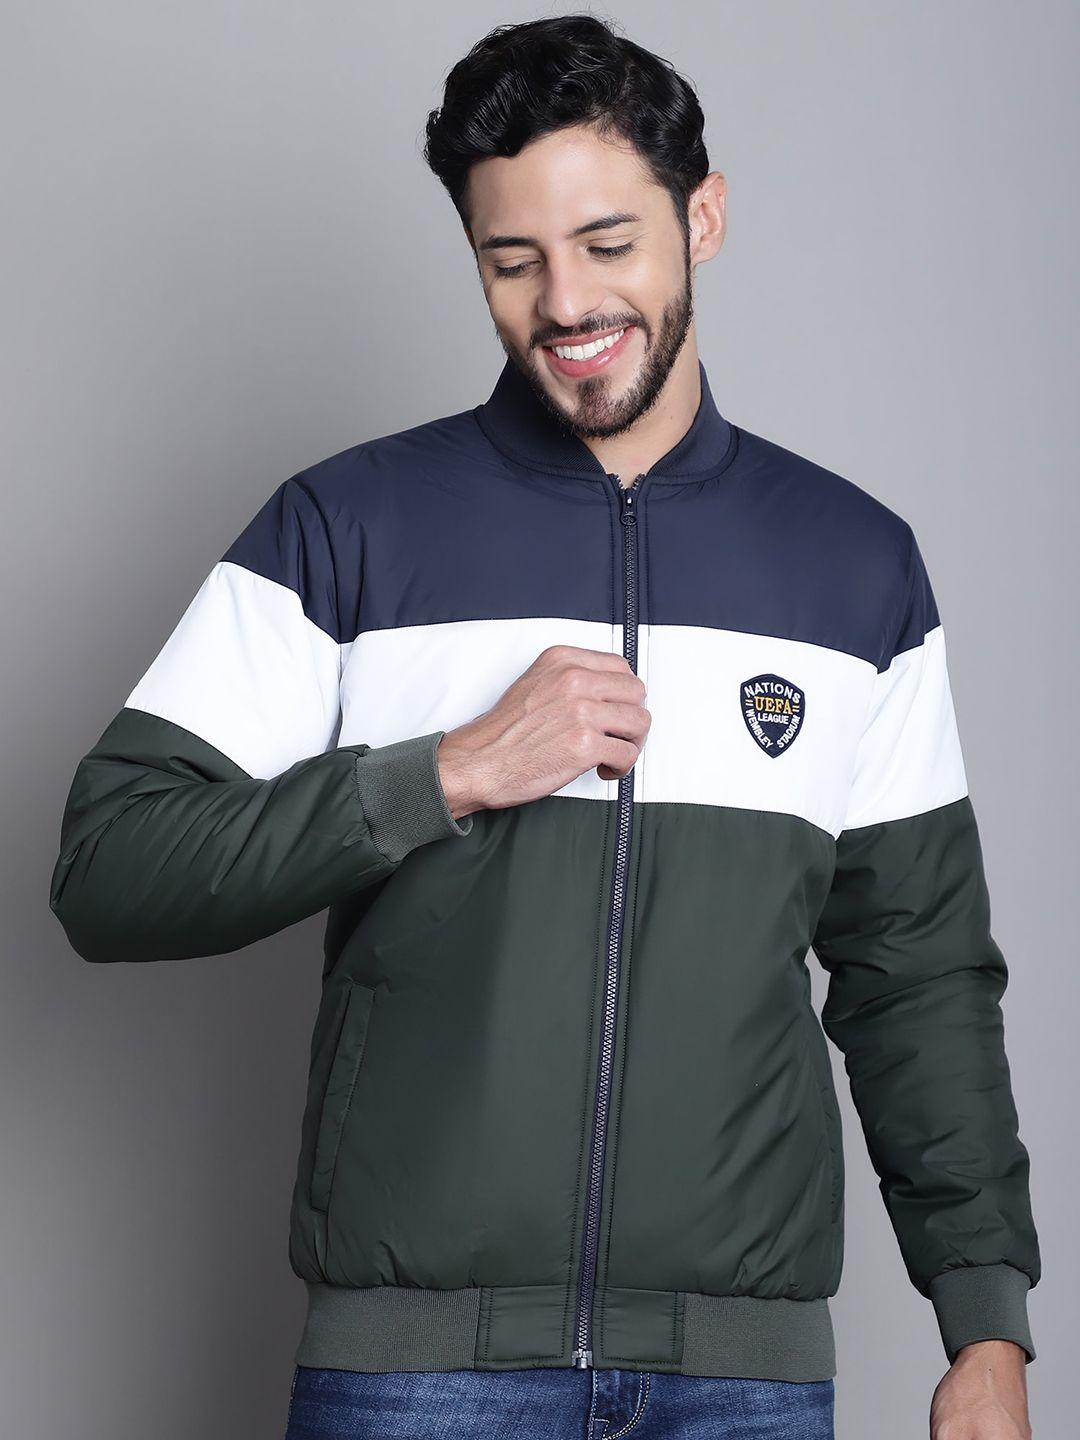 cantabil colourblocked reversible bomber jacket with zip detail